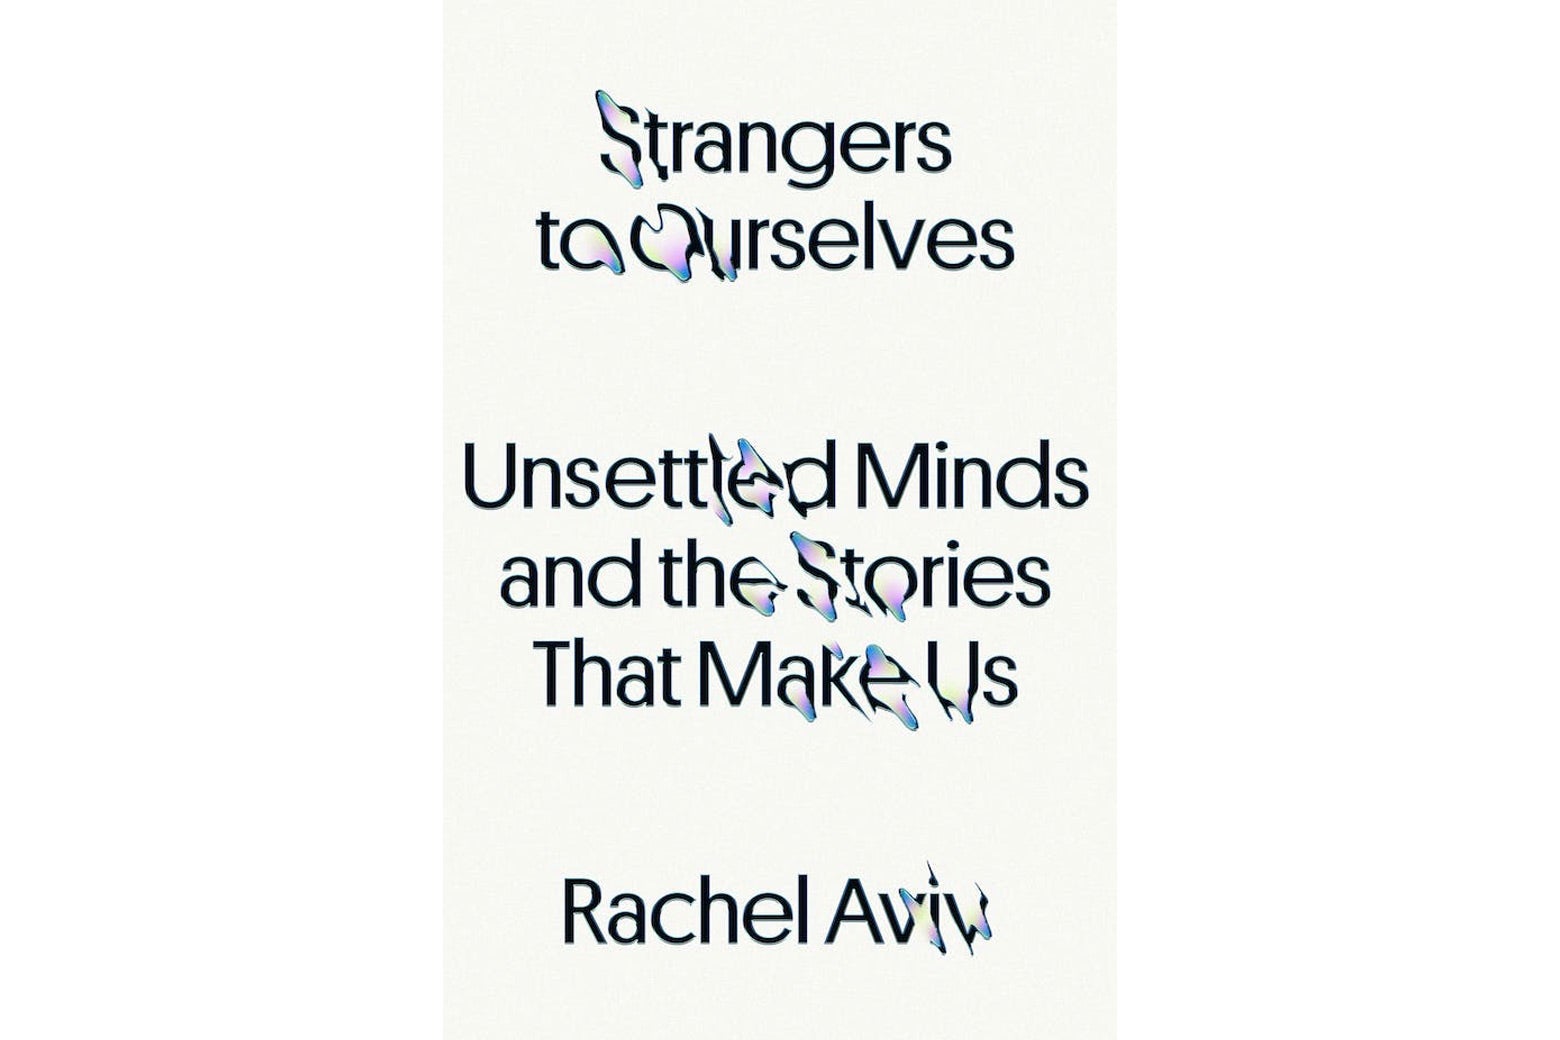 A white book cover that says "Strangers to Ourselves: Unsettled Minds and the Stories That Make Us, Rachel Aviv."